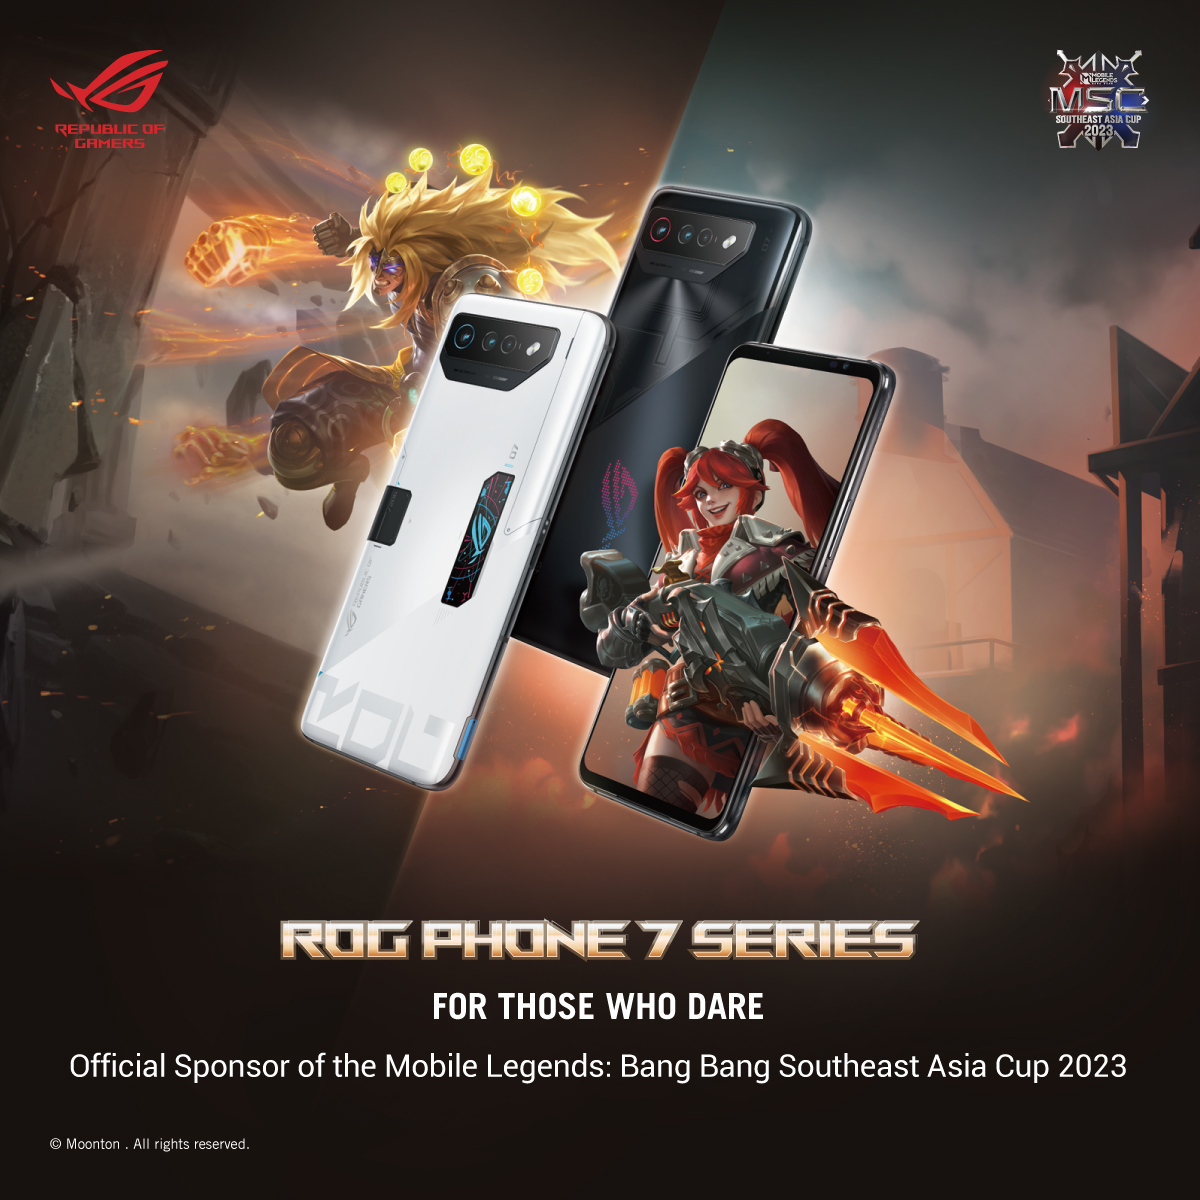 ASUS ROG Announces 2-Year Partnership with MLBB Publisher MOONTON Games 28